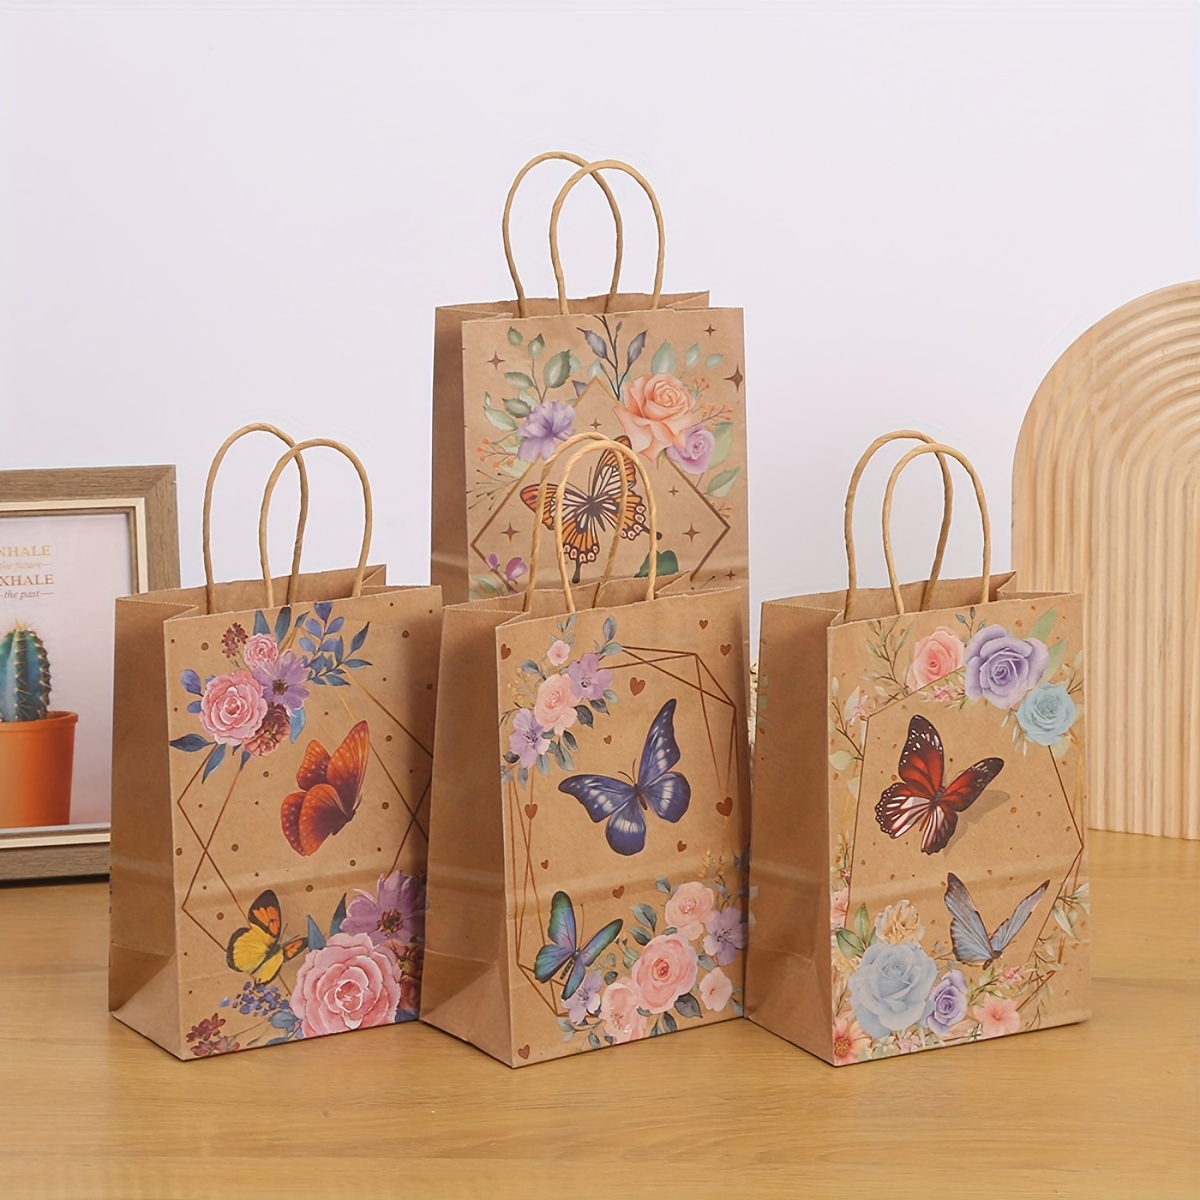 

4pcs/set Butterfly Themed Paper Gift Bags With Handles, Animal Print Patterned Party Favor Bags For Birthday, Candy, Biscuit, Cookie Packaging - Medium And Large Sizes